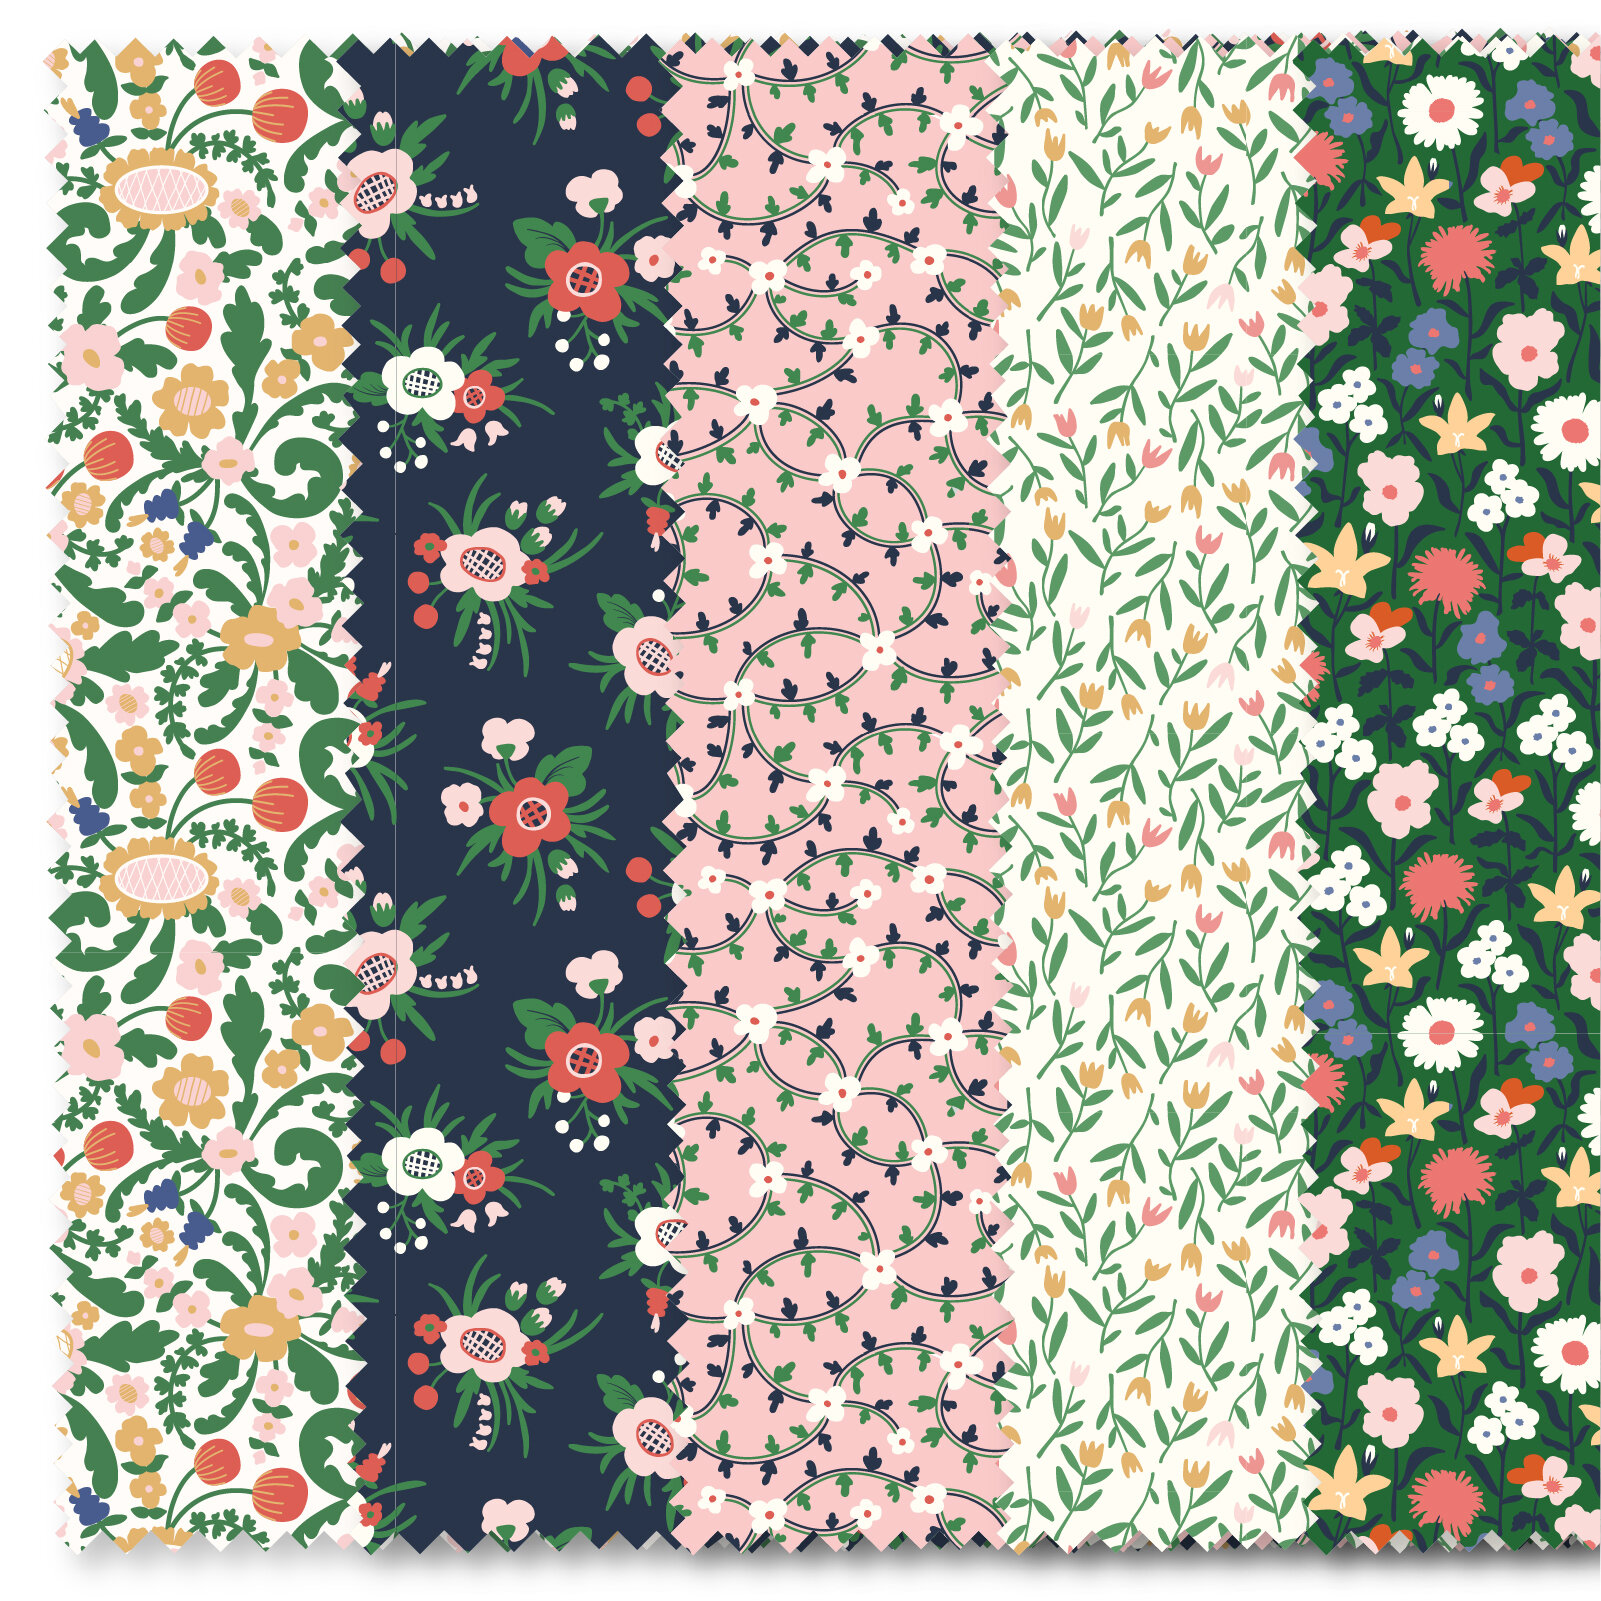 Nordic Spring 610105 Felicity Fabric Helena Nilsson Quilters Cotton 1/2 Yard + Coolness